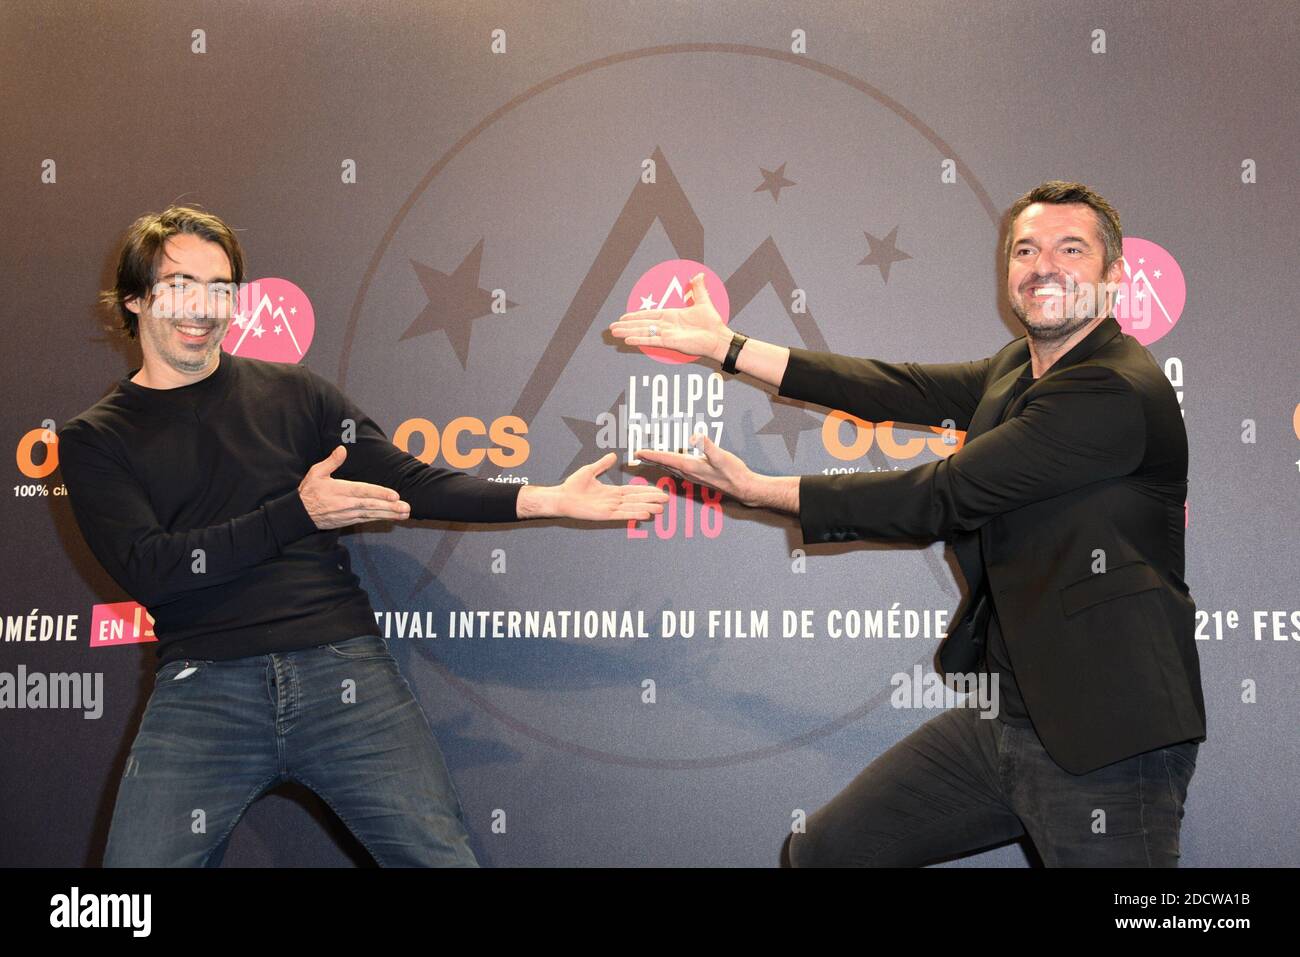 Emmanuel Gillibert and Arnaud Ducret posing for the photocall of Les dents,  pipi et au lit during the 21st Comedy Film Festival in L'Alpe dHuez,  France, on January 19, 2018. Photo by